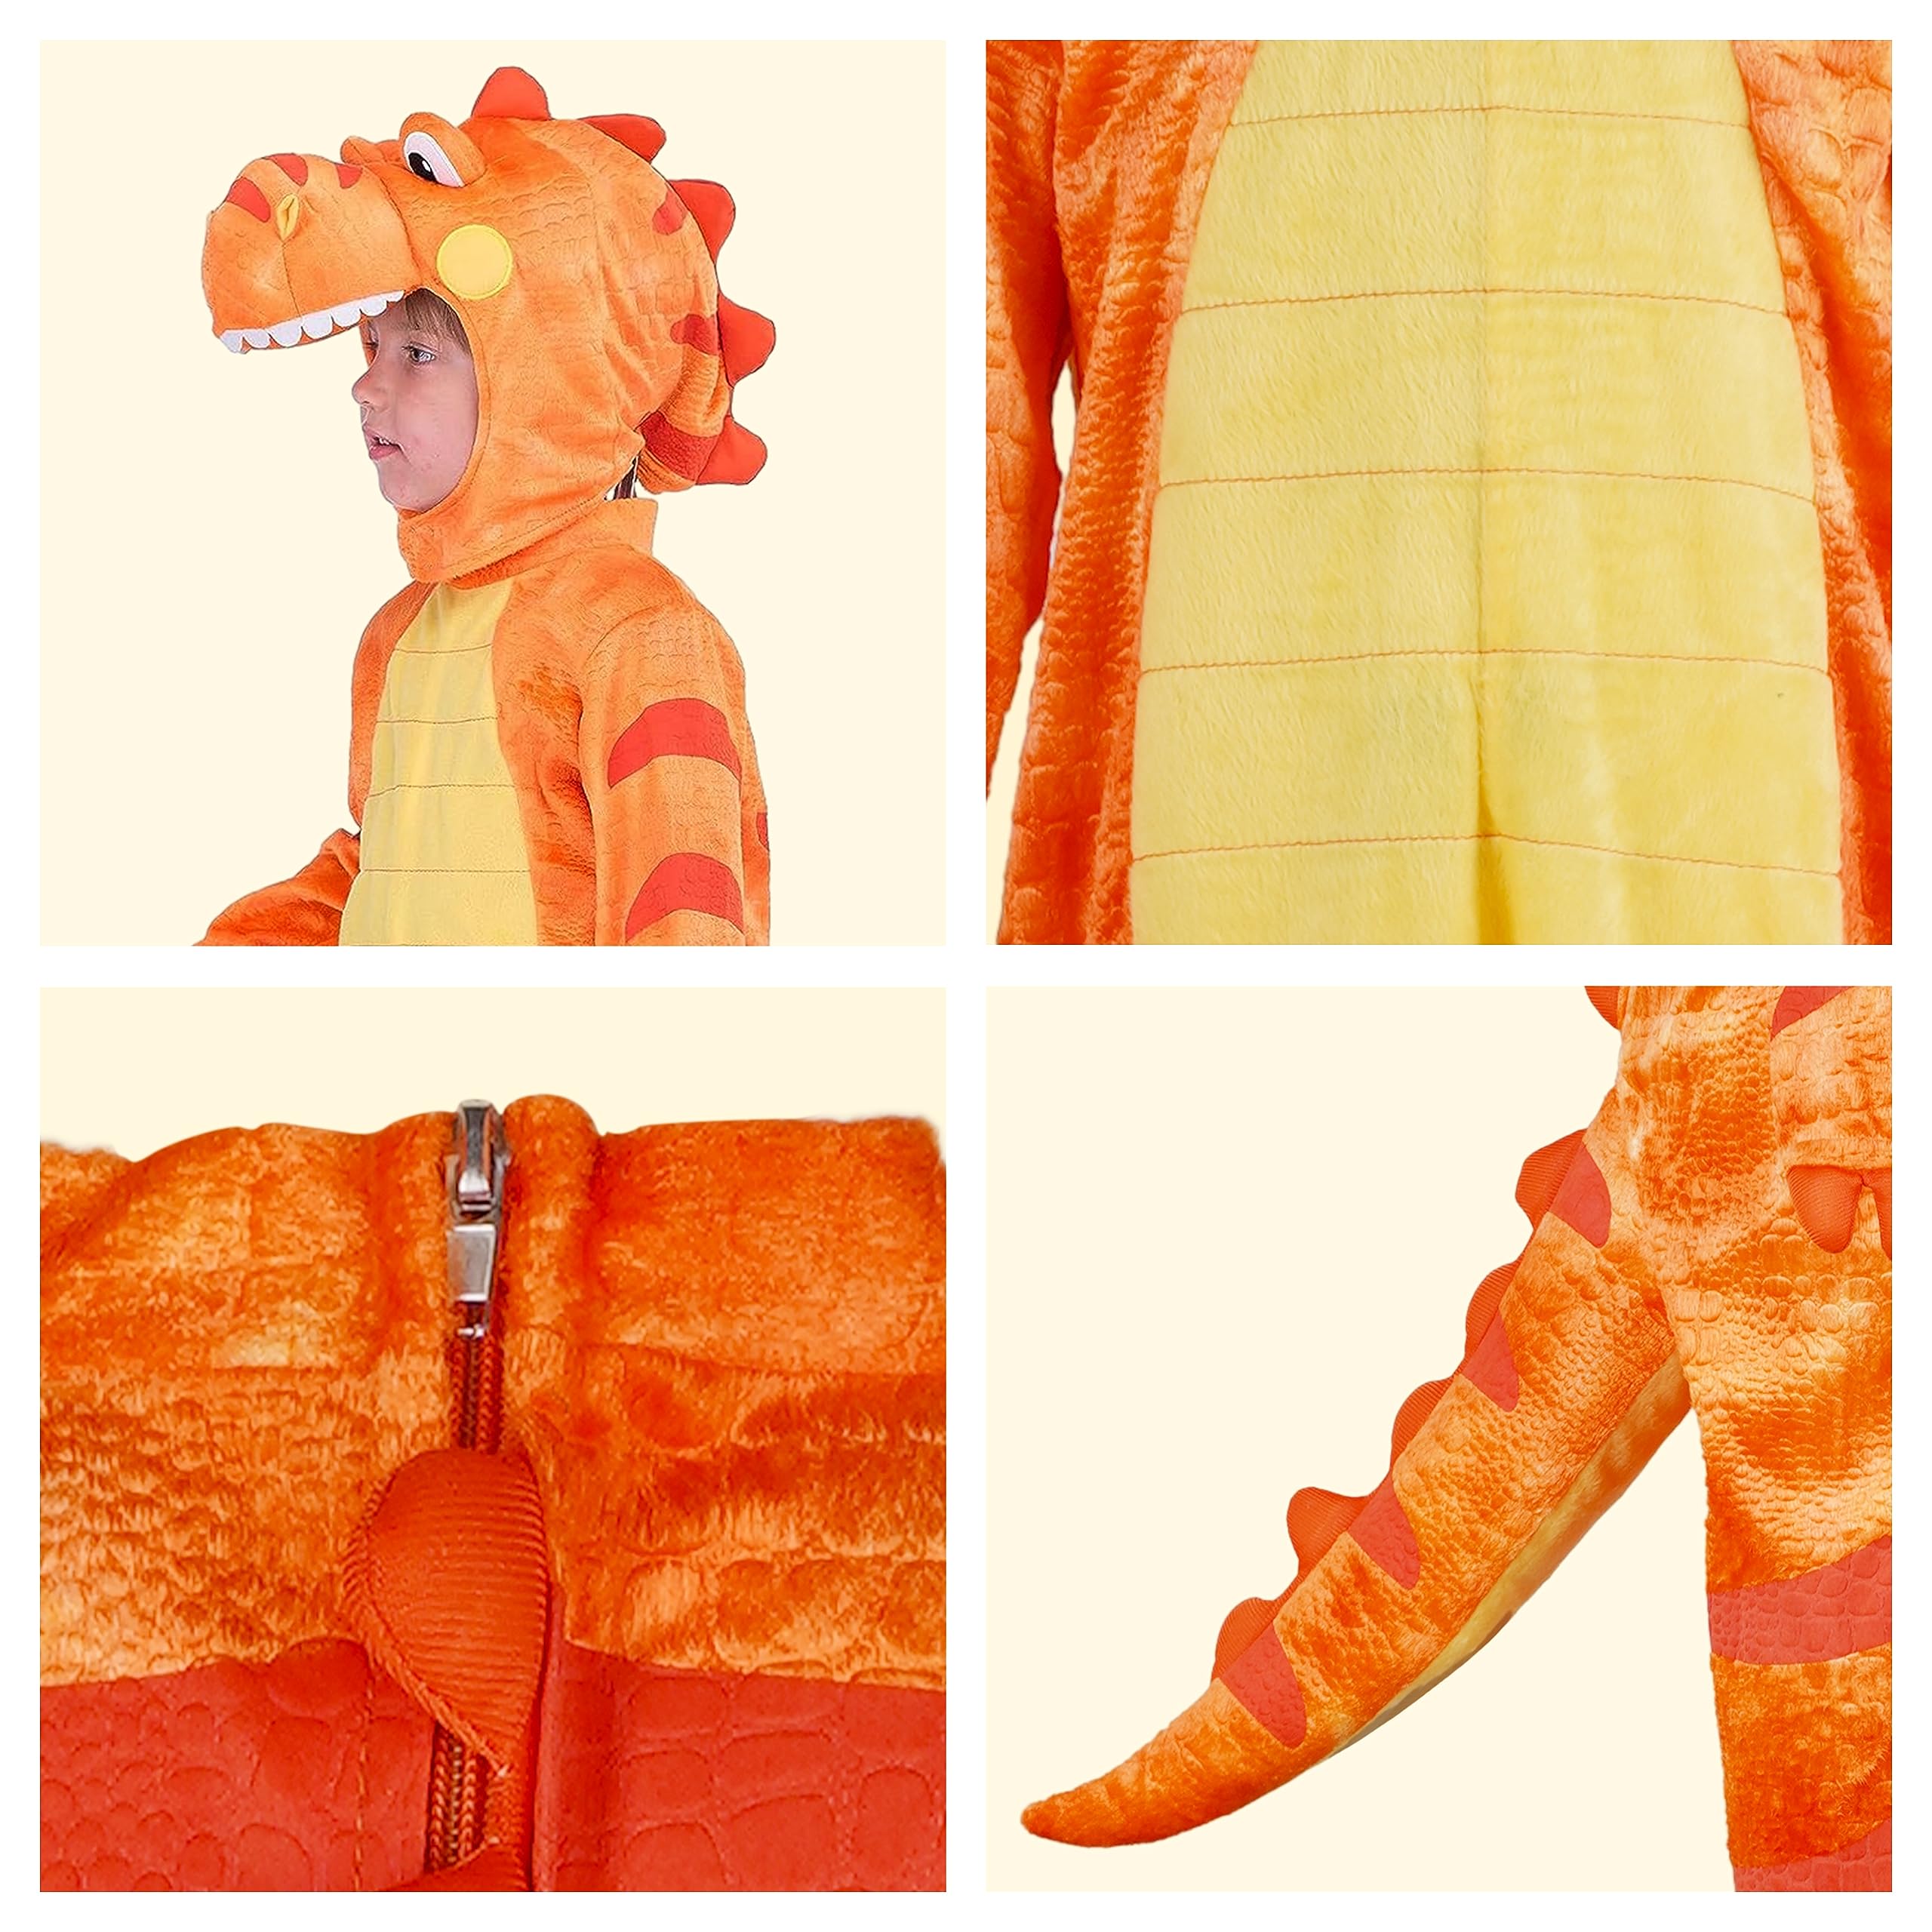 Spooktacular Creations Child Orange Dinosaur T-Rex Costume with Toy Dinosaur Egg for Halloween Dress up, Dinosaur Theme Party (Small (5-7 yrs))